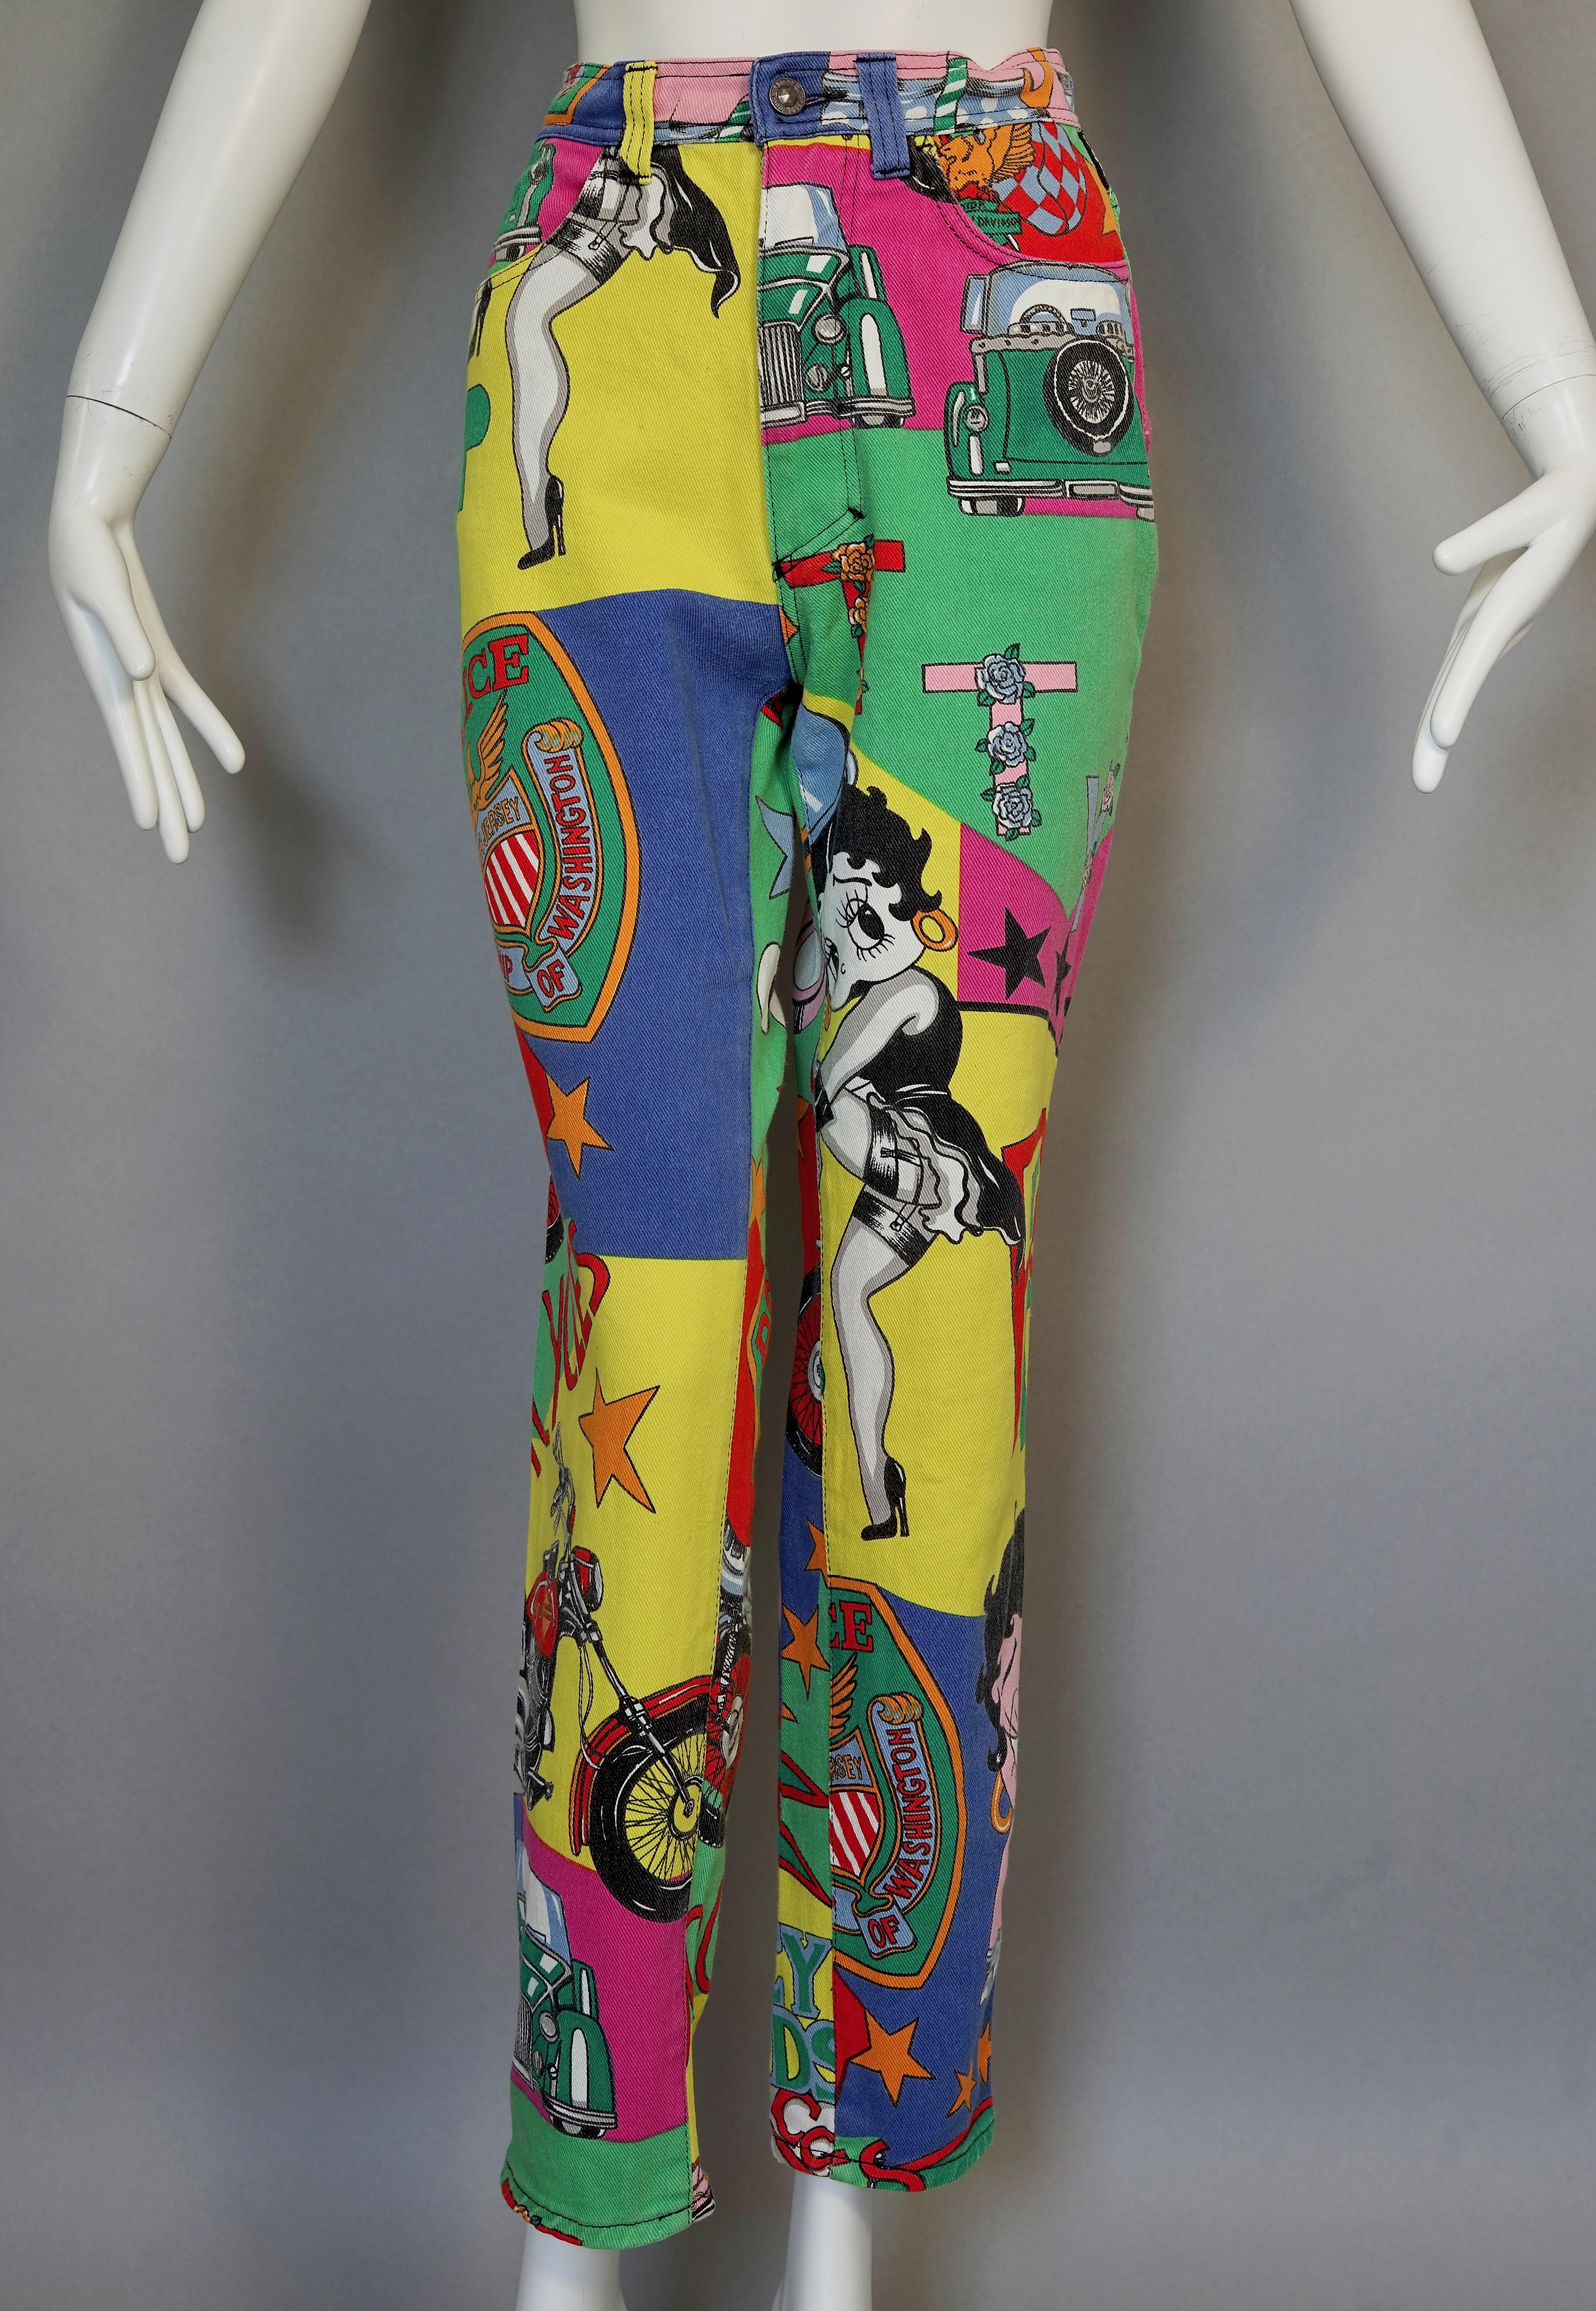 Vintage VERSACE Betty Boop Cartoon Print Pants Jeans Trousers In Excellent Condition For Sale In Kingersheim, Alsace